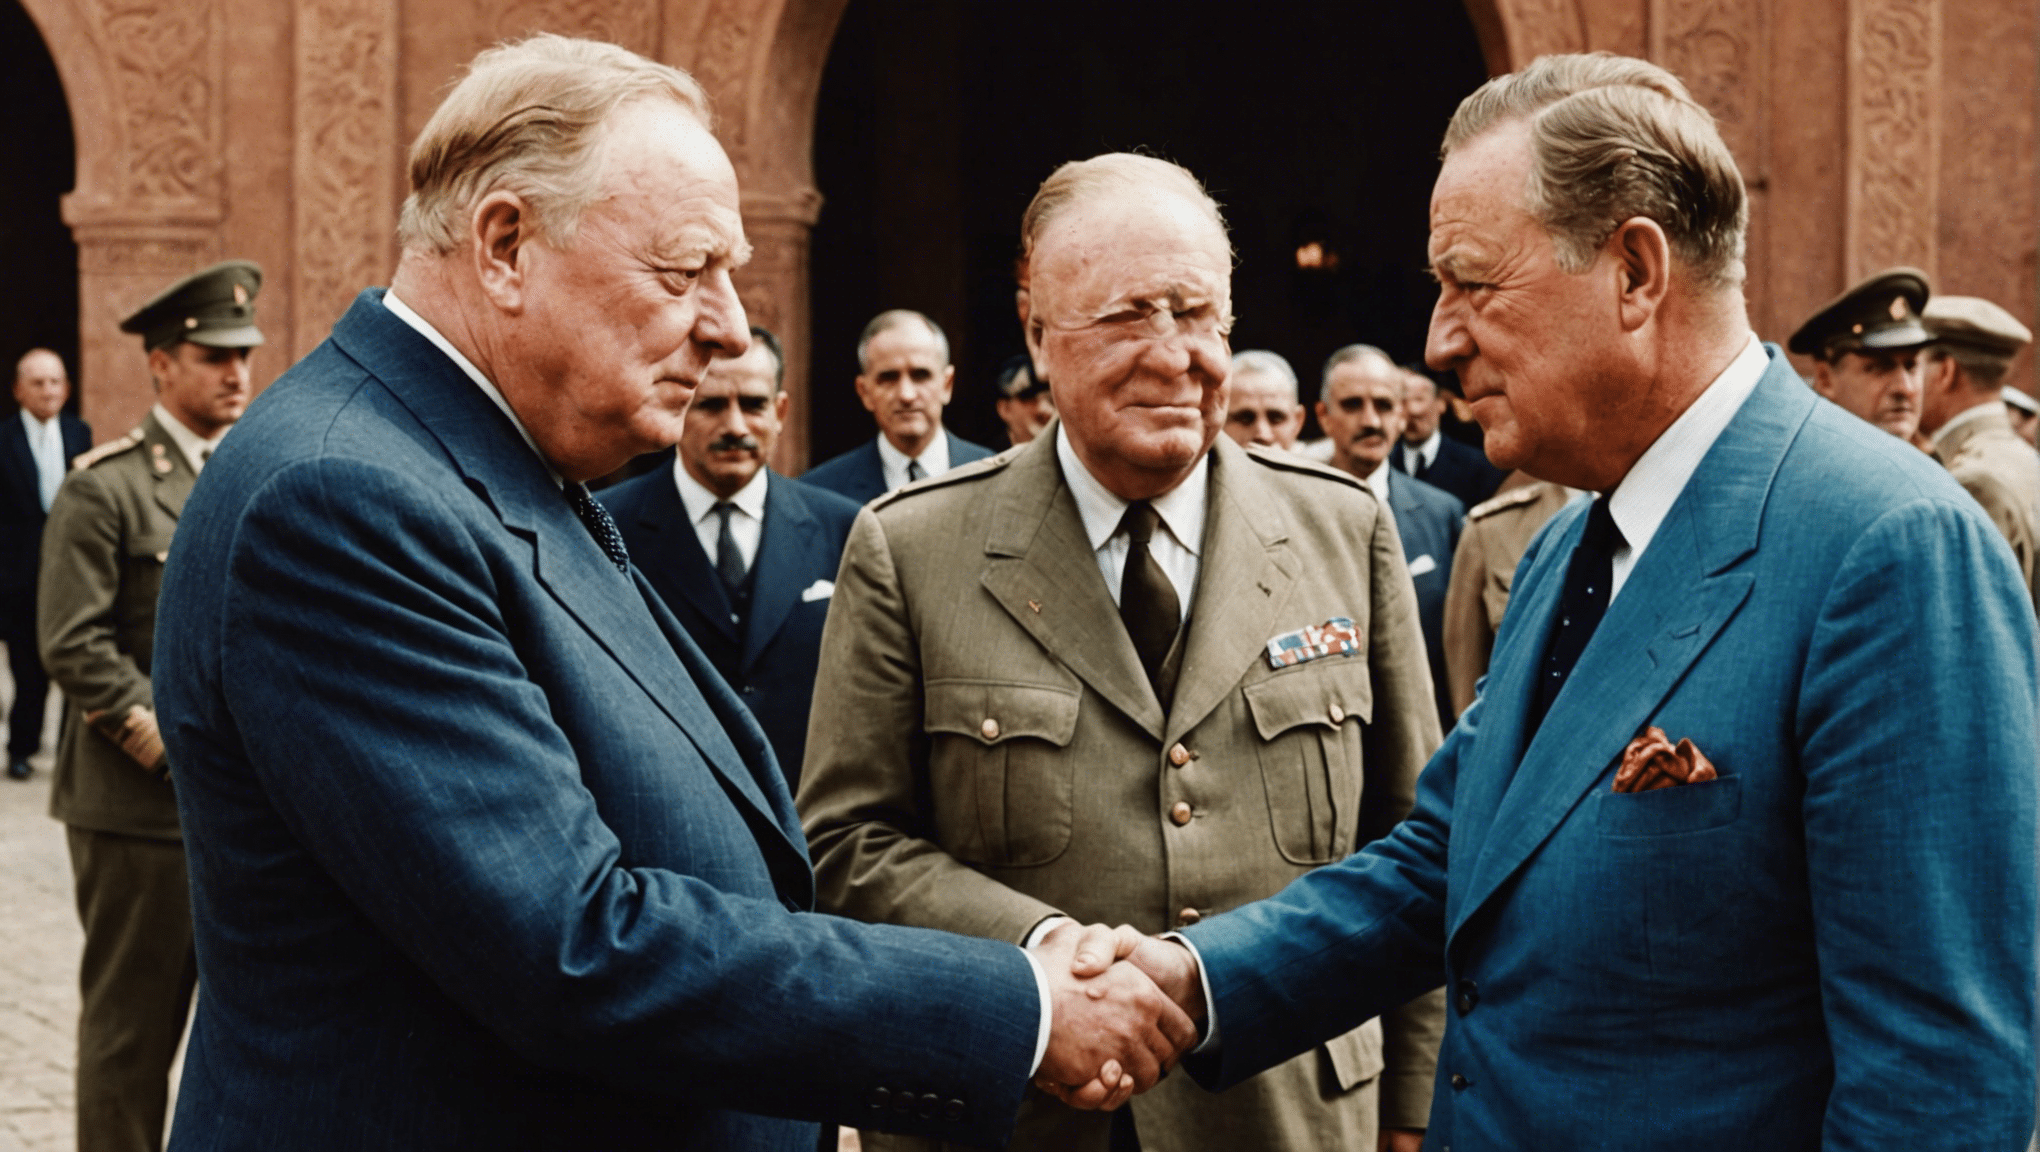 churchill and roosevelt meeting during world war ii in marrakech, an iconic moment of history that shaped the course of the war and the world. learn about this historic encounter and its significance.